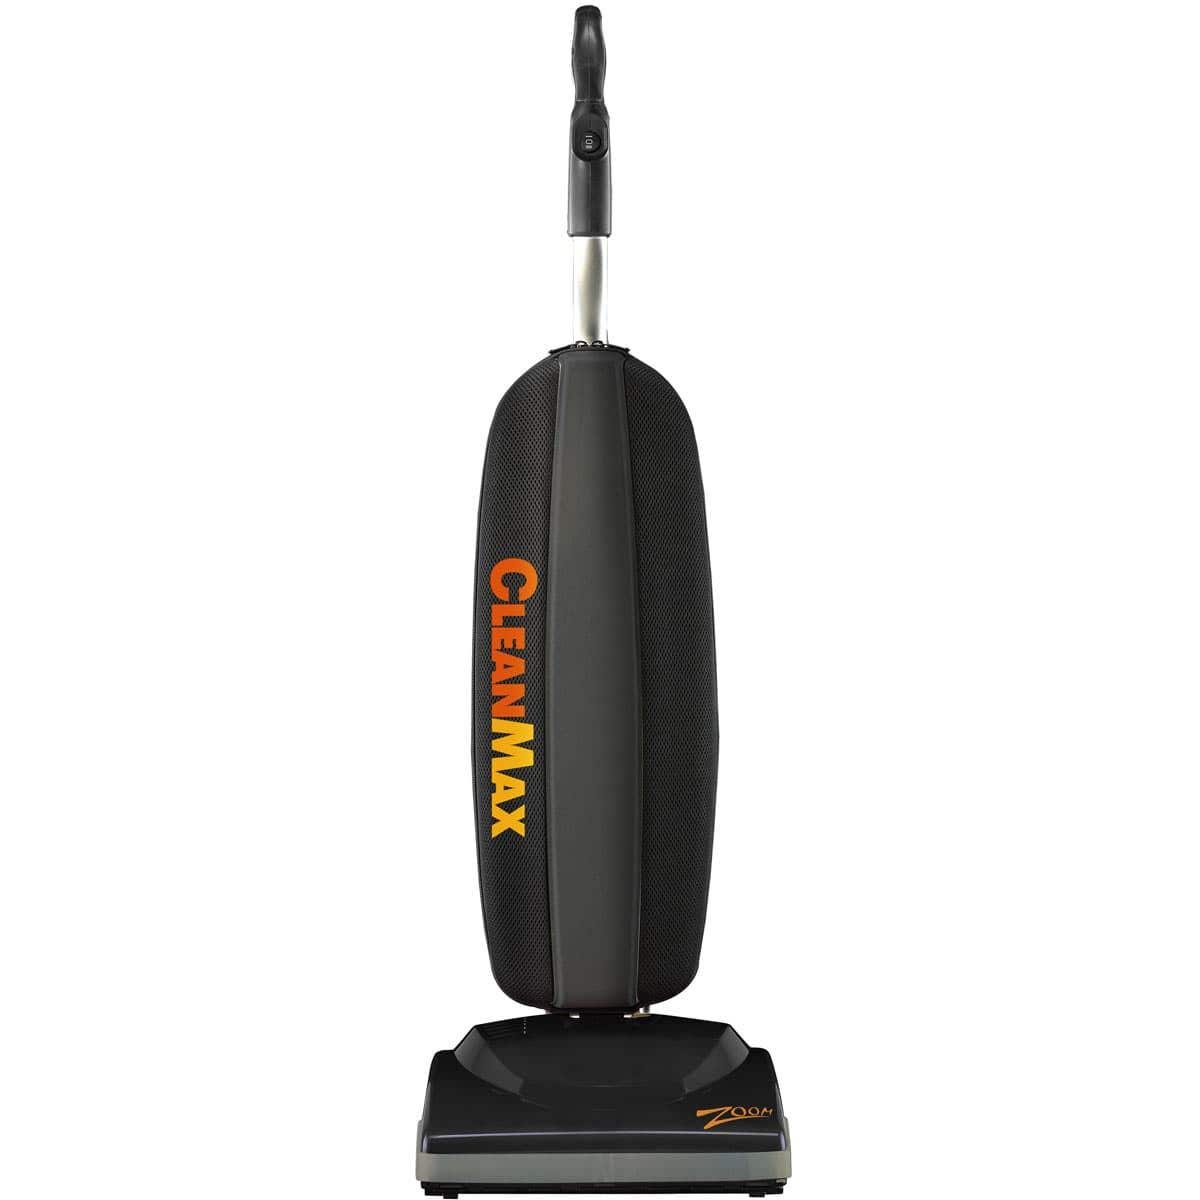 CleanMax Zoom Ultra Light Weight Vacuum With Wood Brushroll CleanMax, Zoom, Ultra, Light, Weight, Cordless, Vacuum, clean, max, metal, brushroll, brush, roll, 